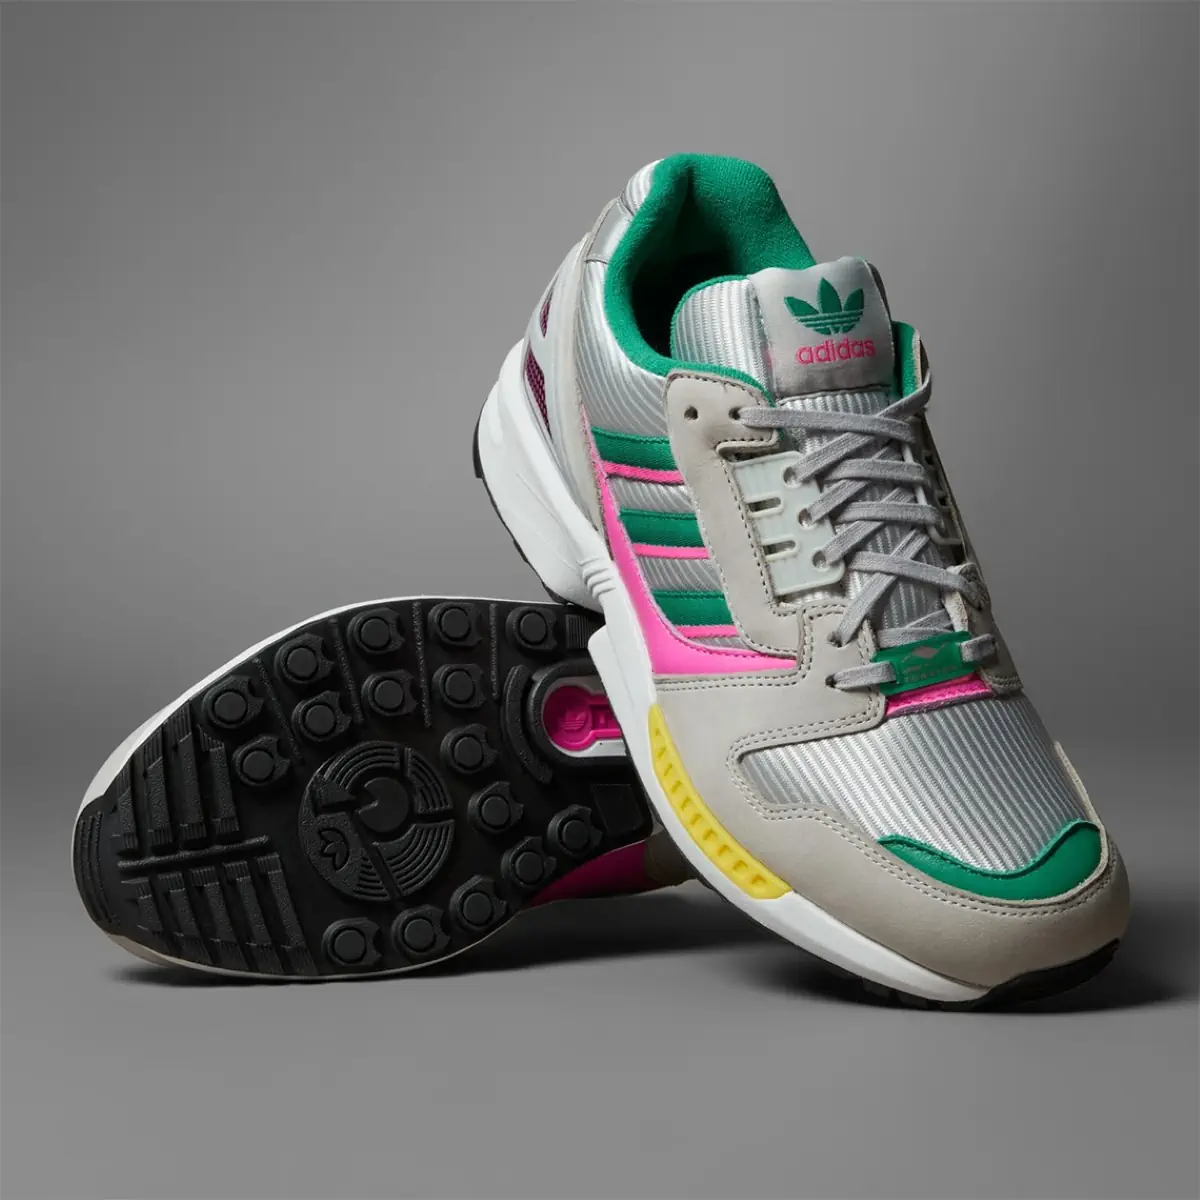 adidas ZX 8000 resplendent in pink and green